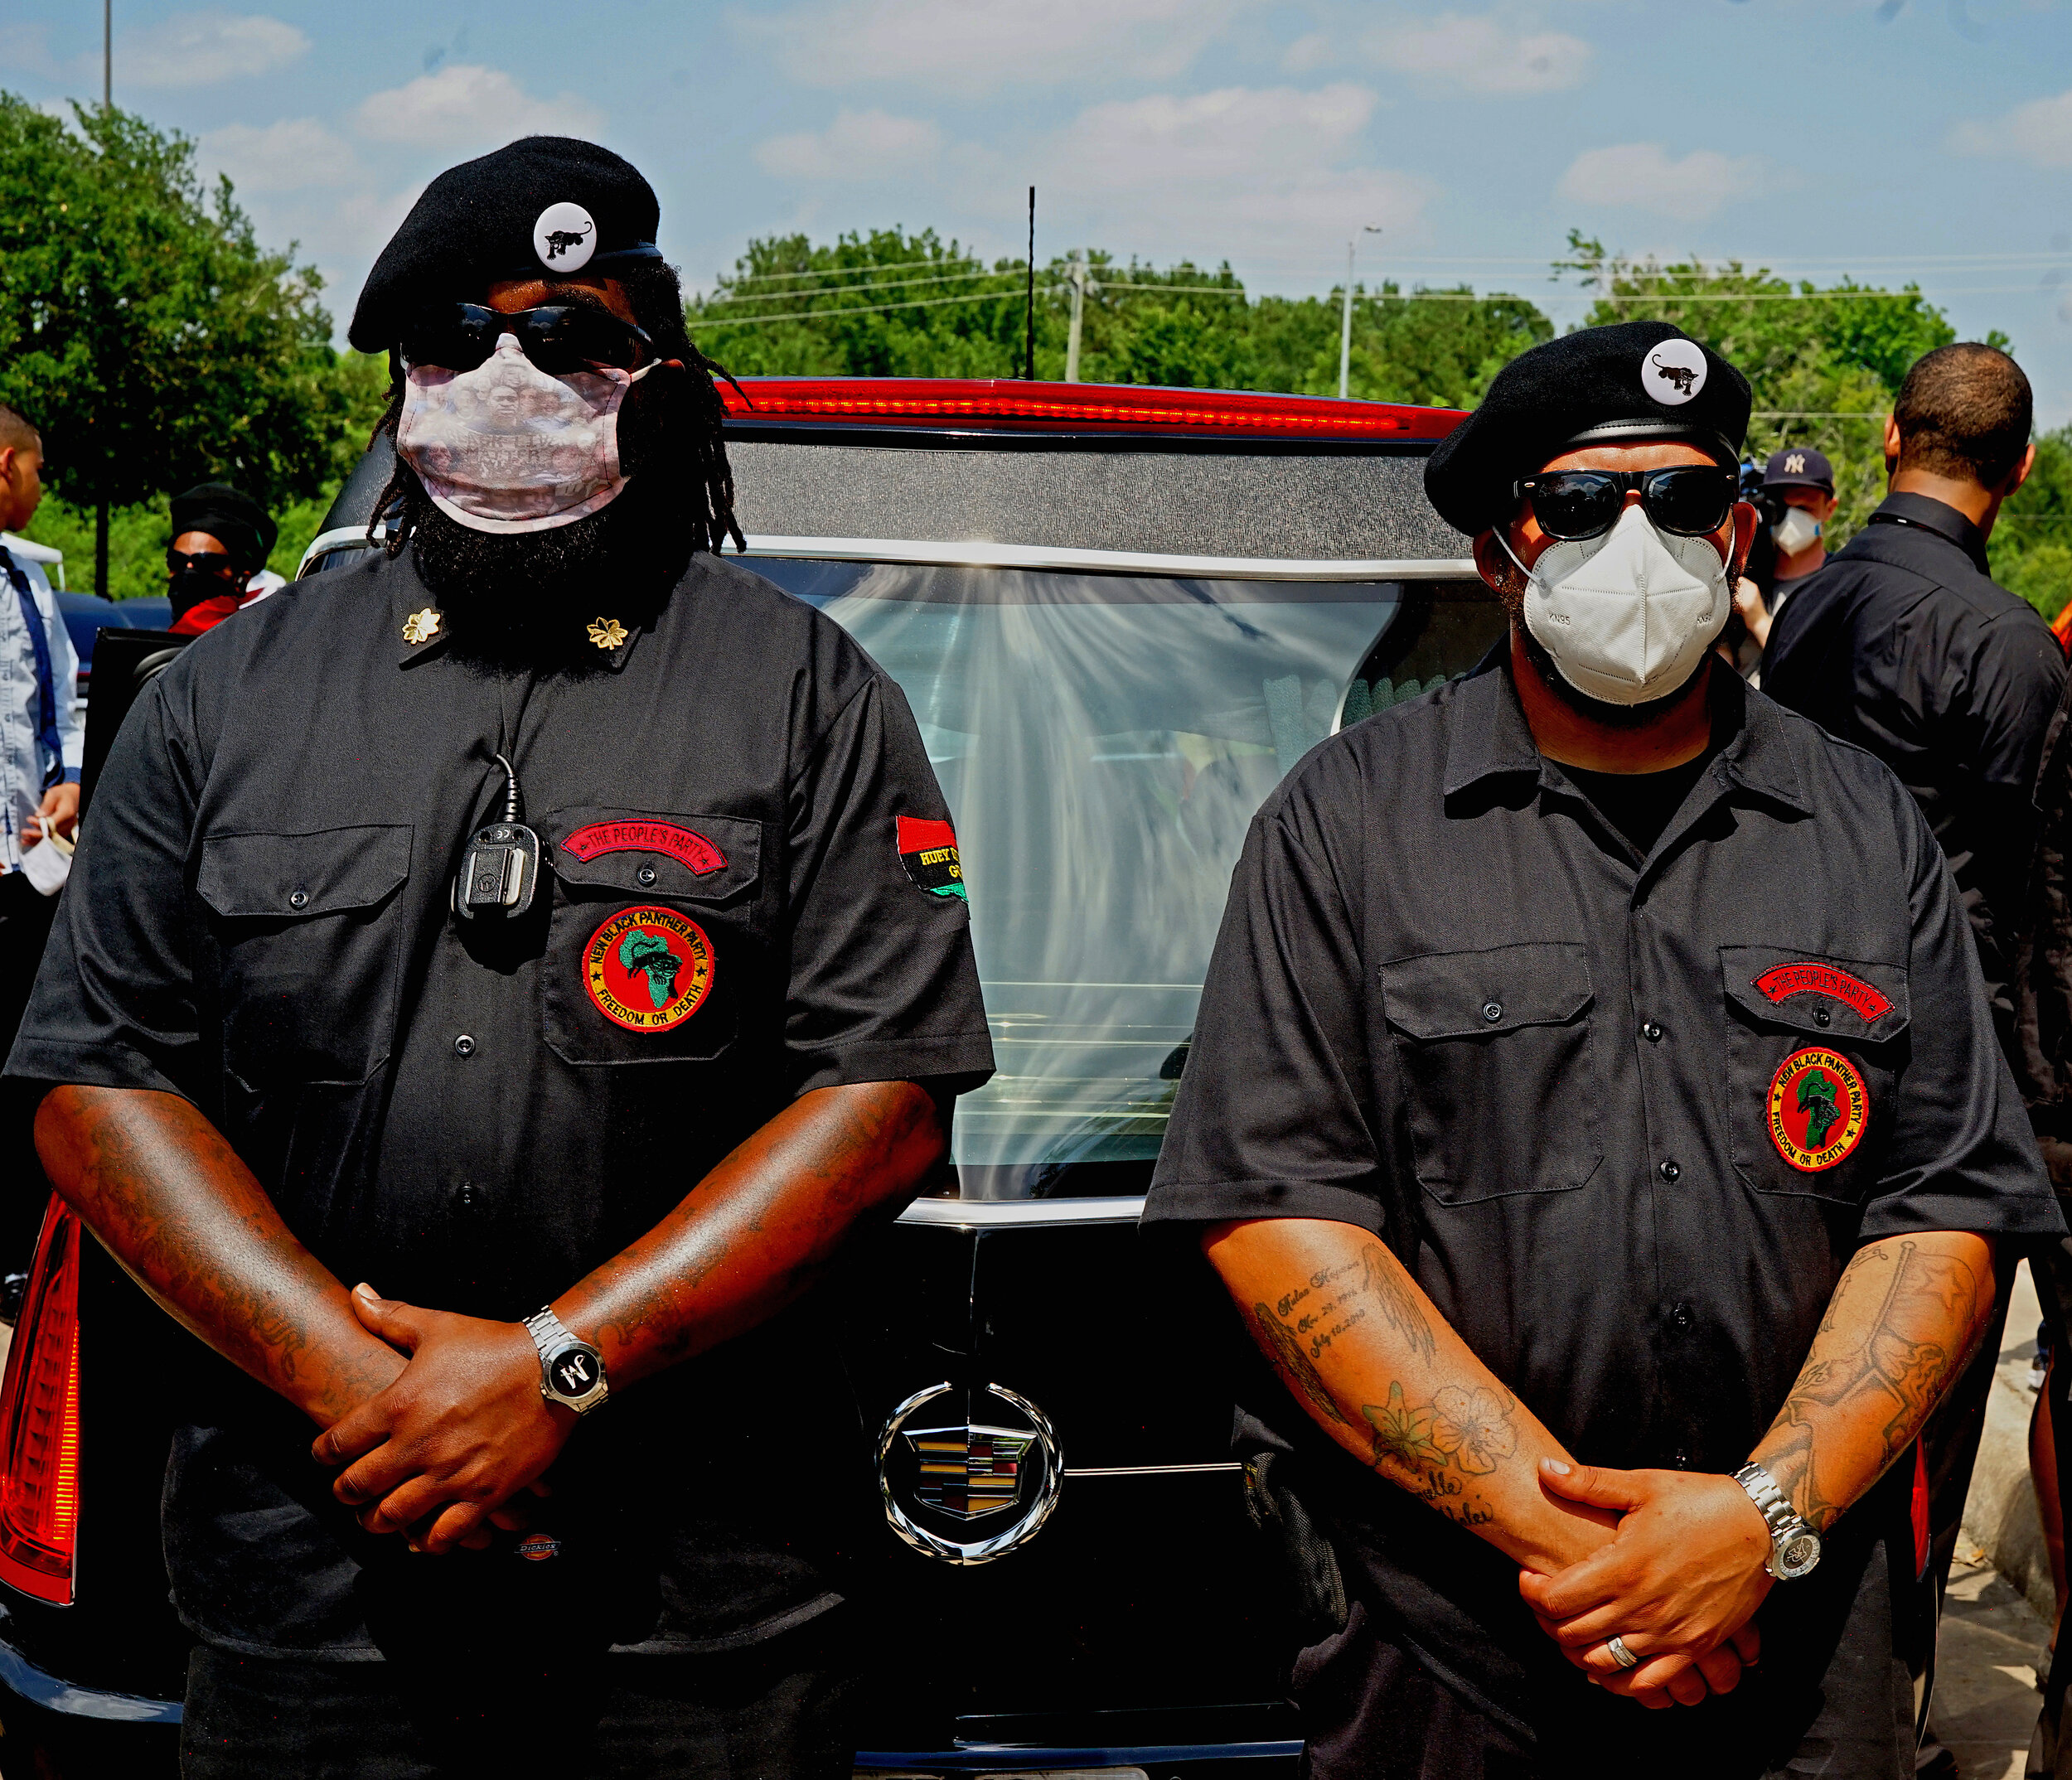  “June, 2020 - Houston, Texas - At the George Floyd funeral, members from the Southern division of the Black Panther Party security forces stand guard to protect Mr. Floyd’s body at the Fountain of Praise church.” © Russell Frederick 